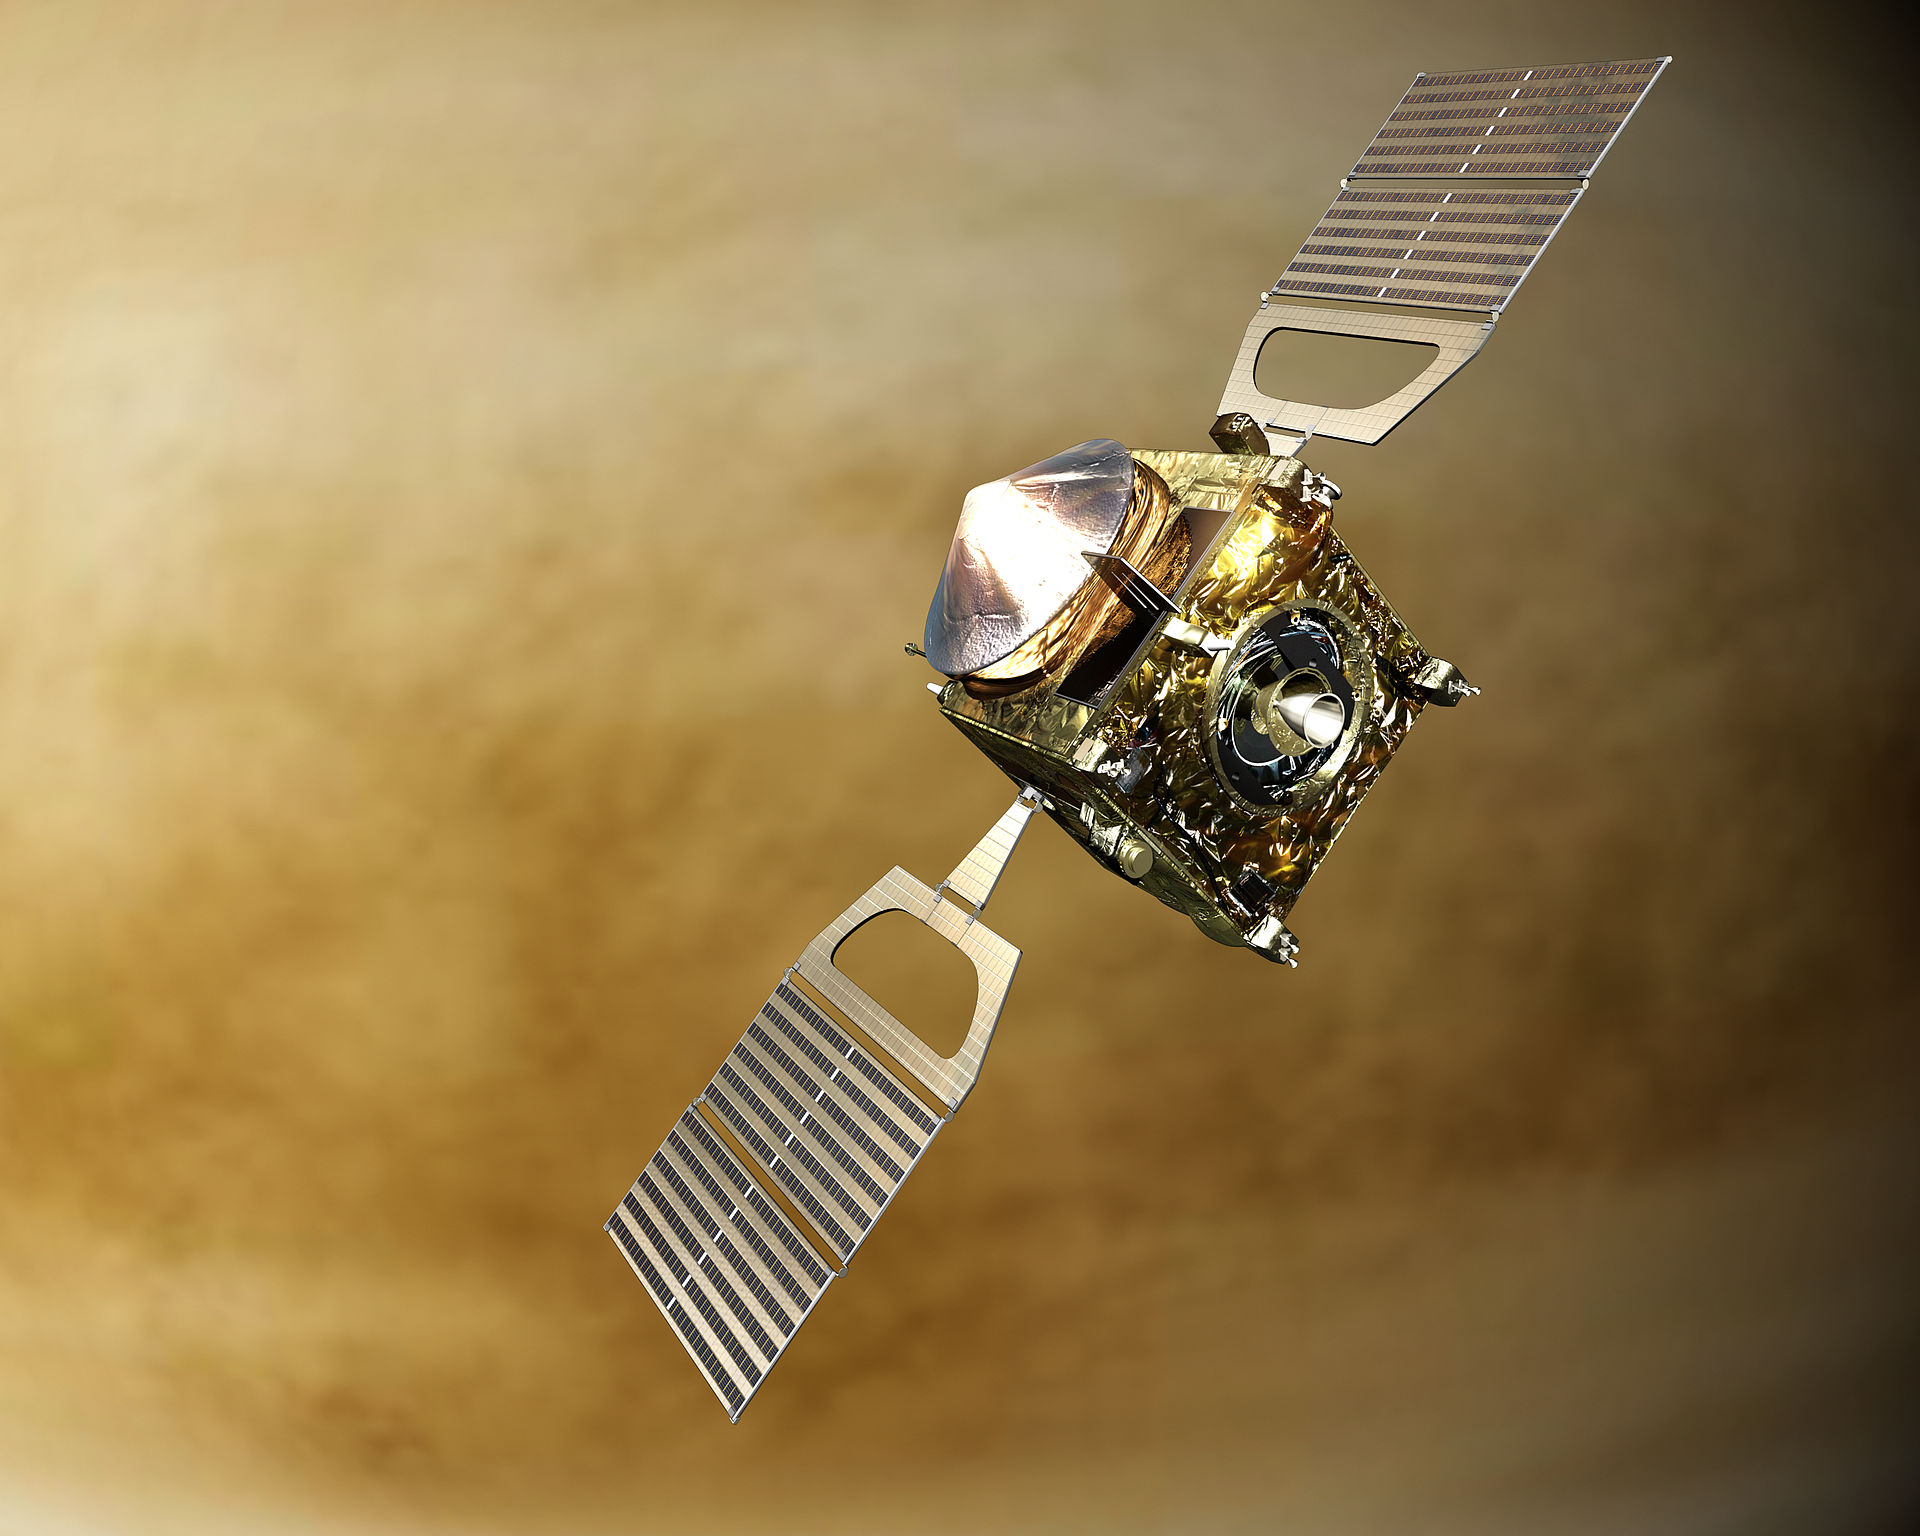 "It is a sensible idea to bring a probe to Venus and even land on the surface"